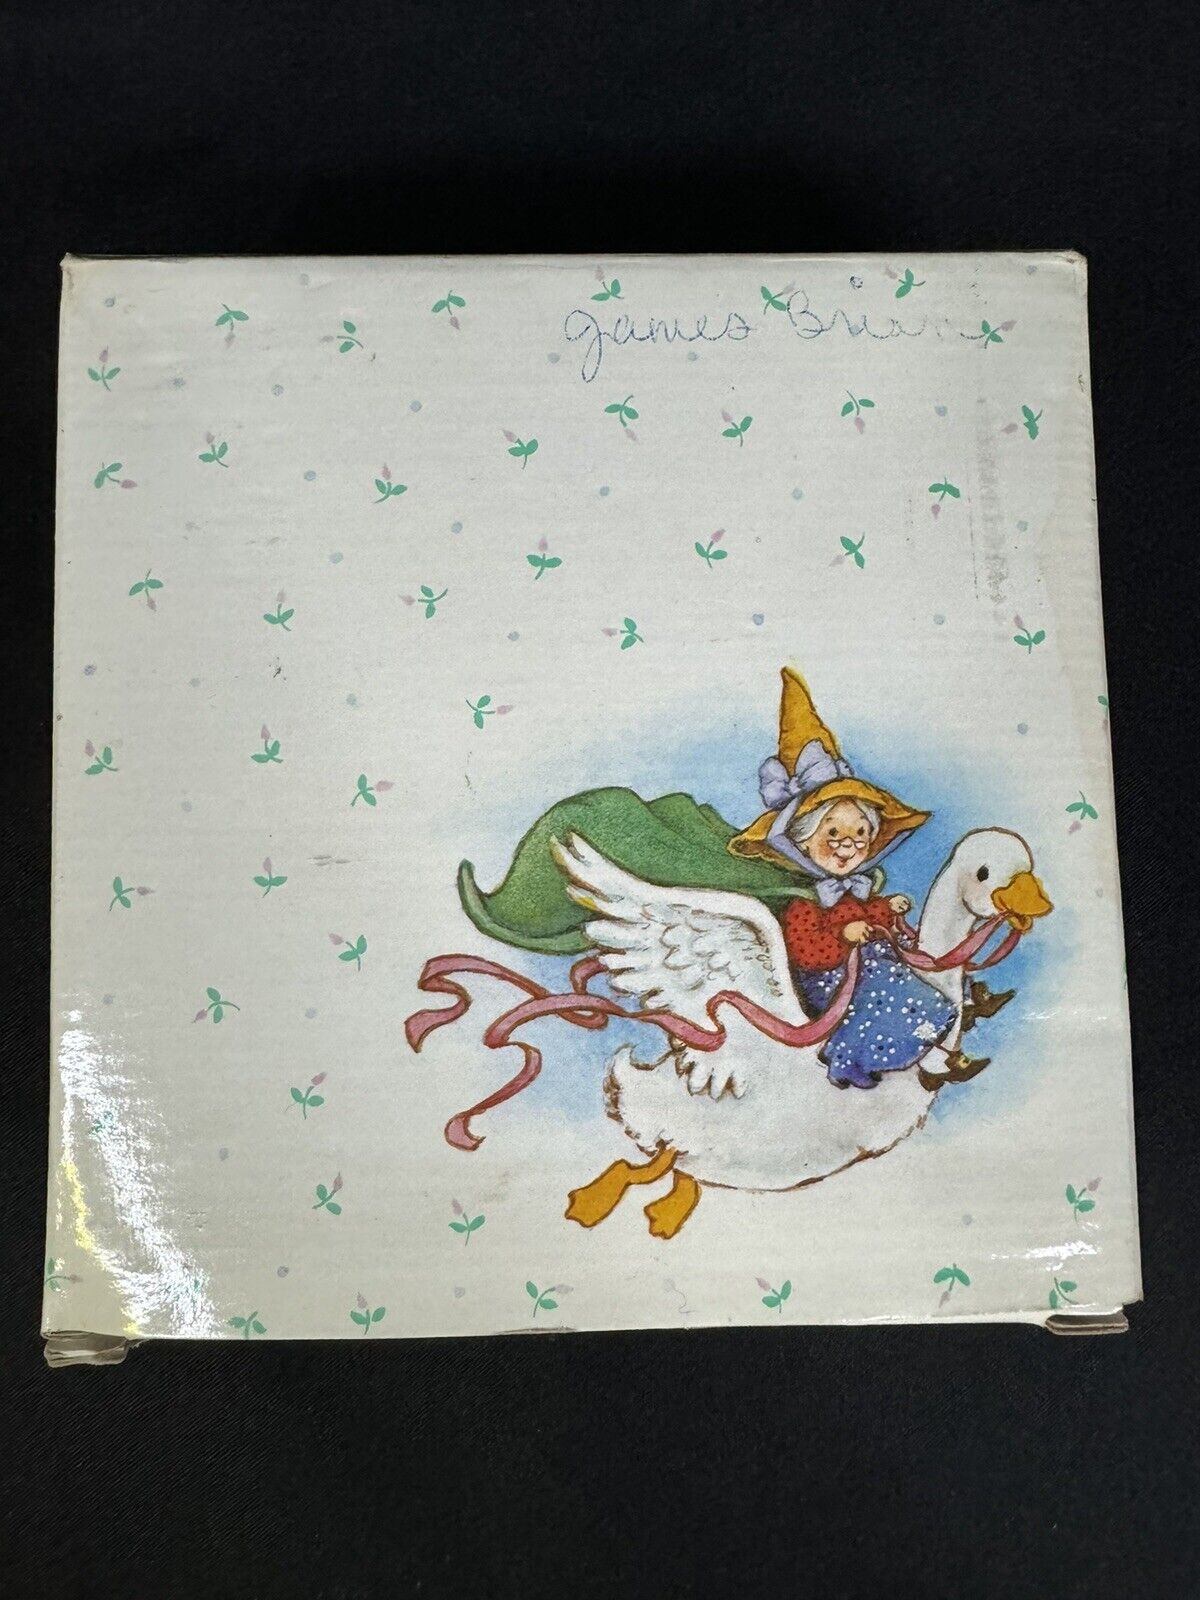 New 1984 Avon Baby\'s Keepsake Spoon and Bowl Set With Box Vintage Mother Goose